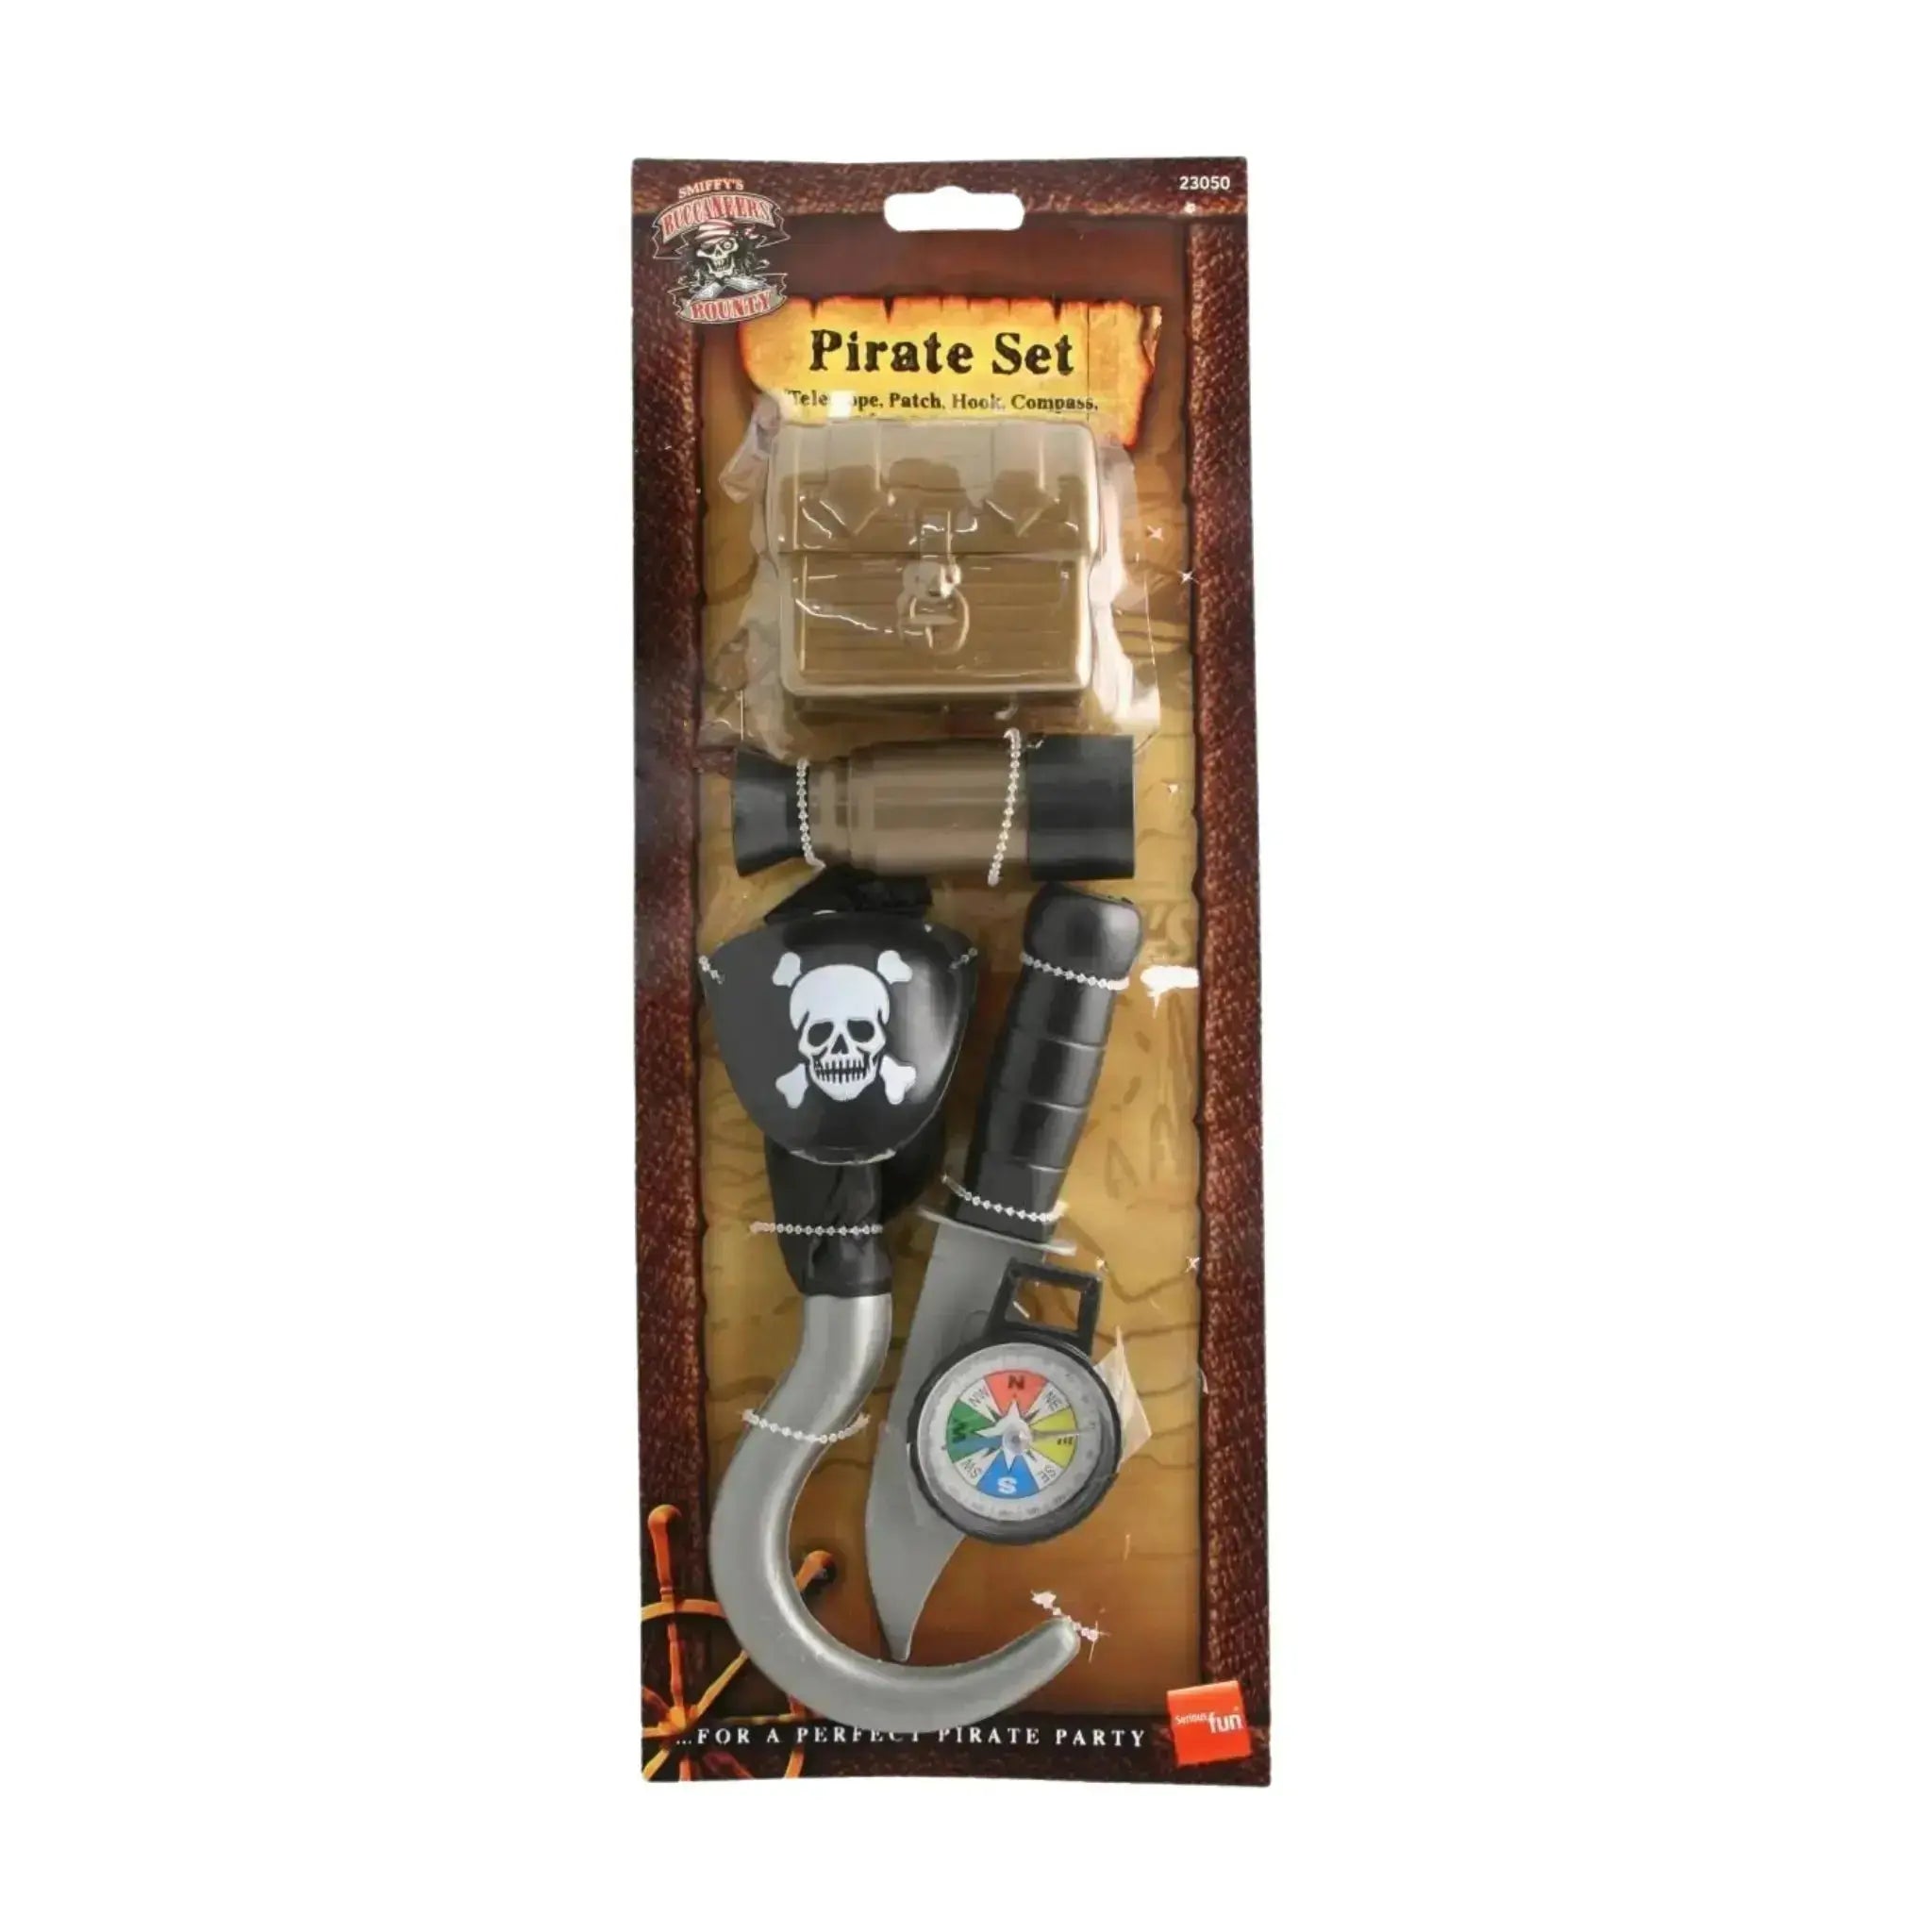 Pirate Set With Compass | The Party Hut